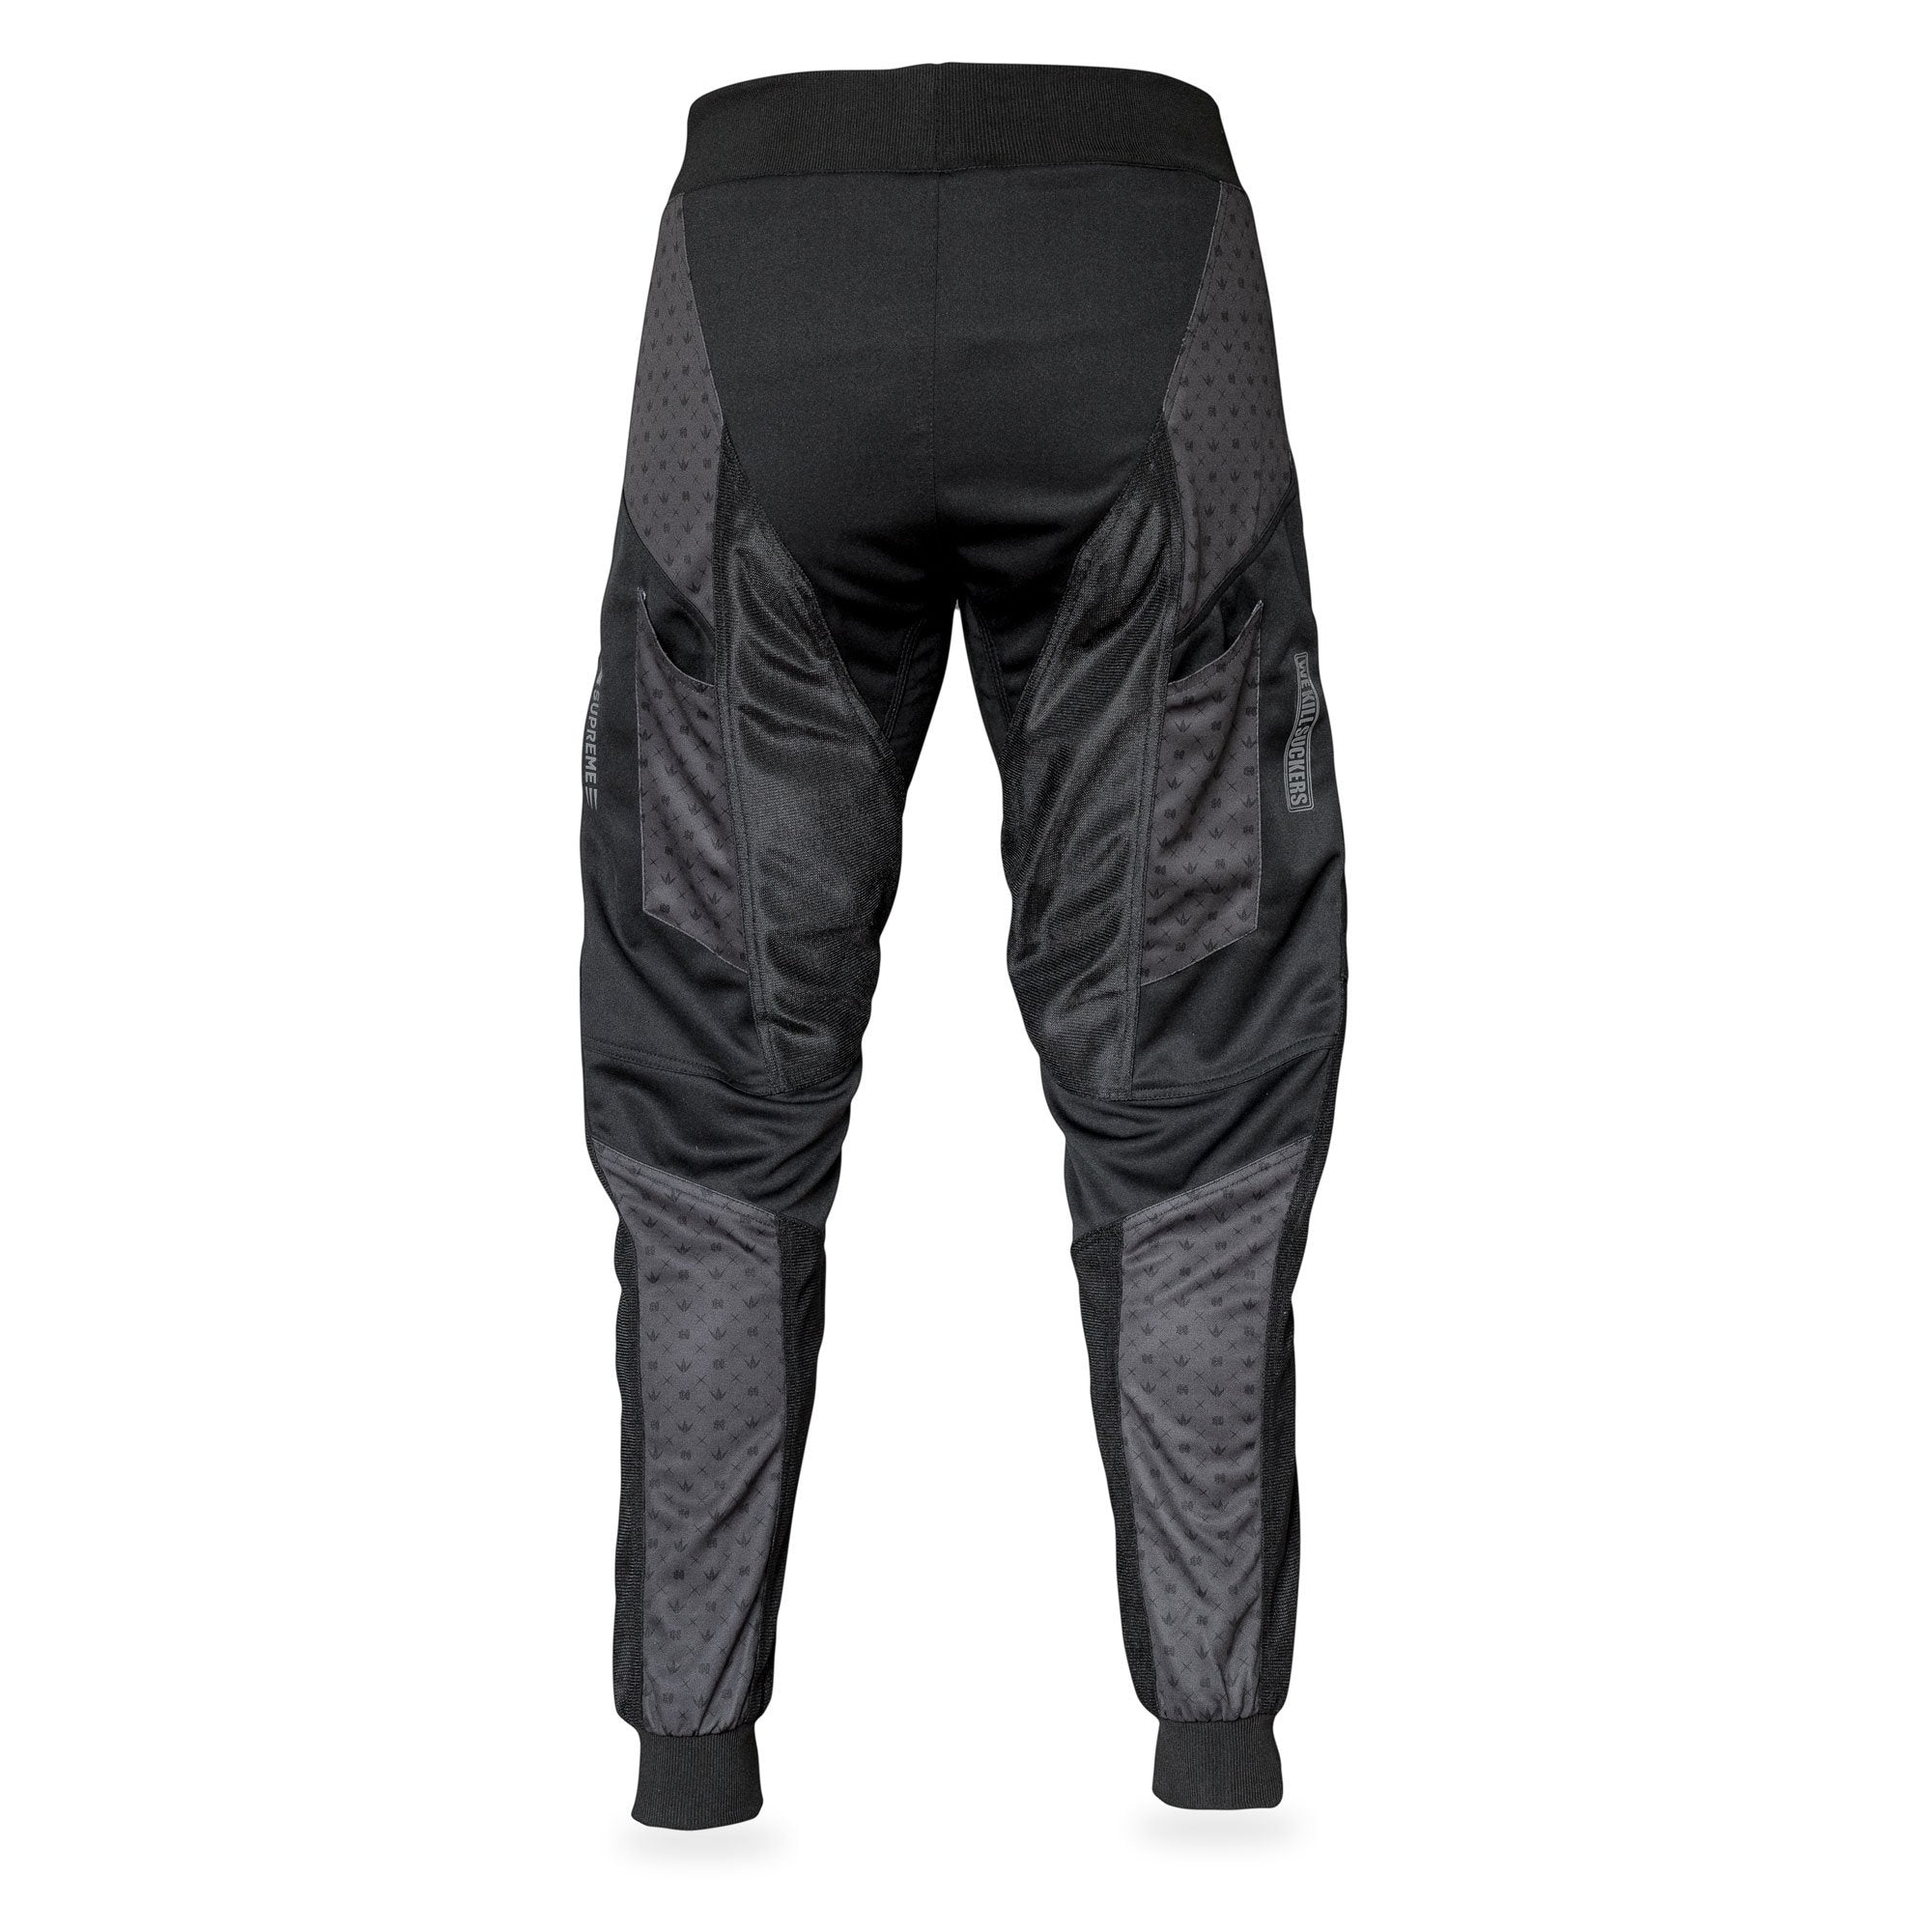 Review: 11 of the Best Women's Riding Pants Ridden & Rated - Pinkbike